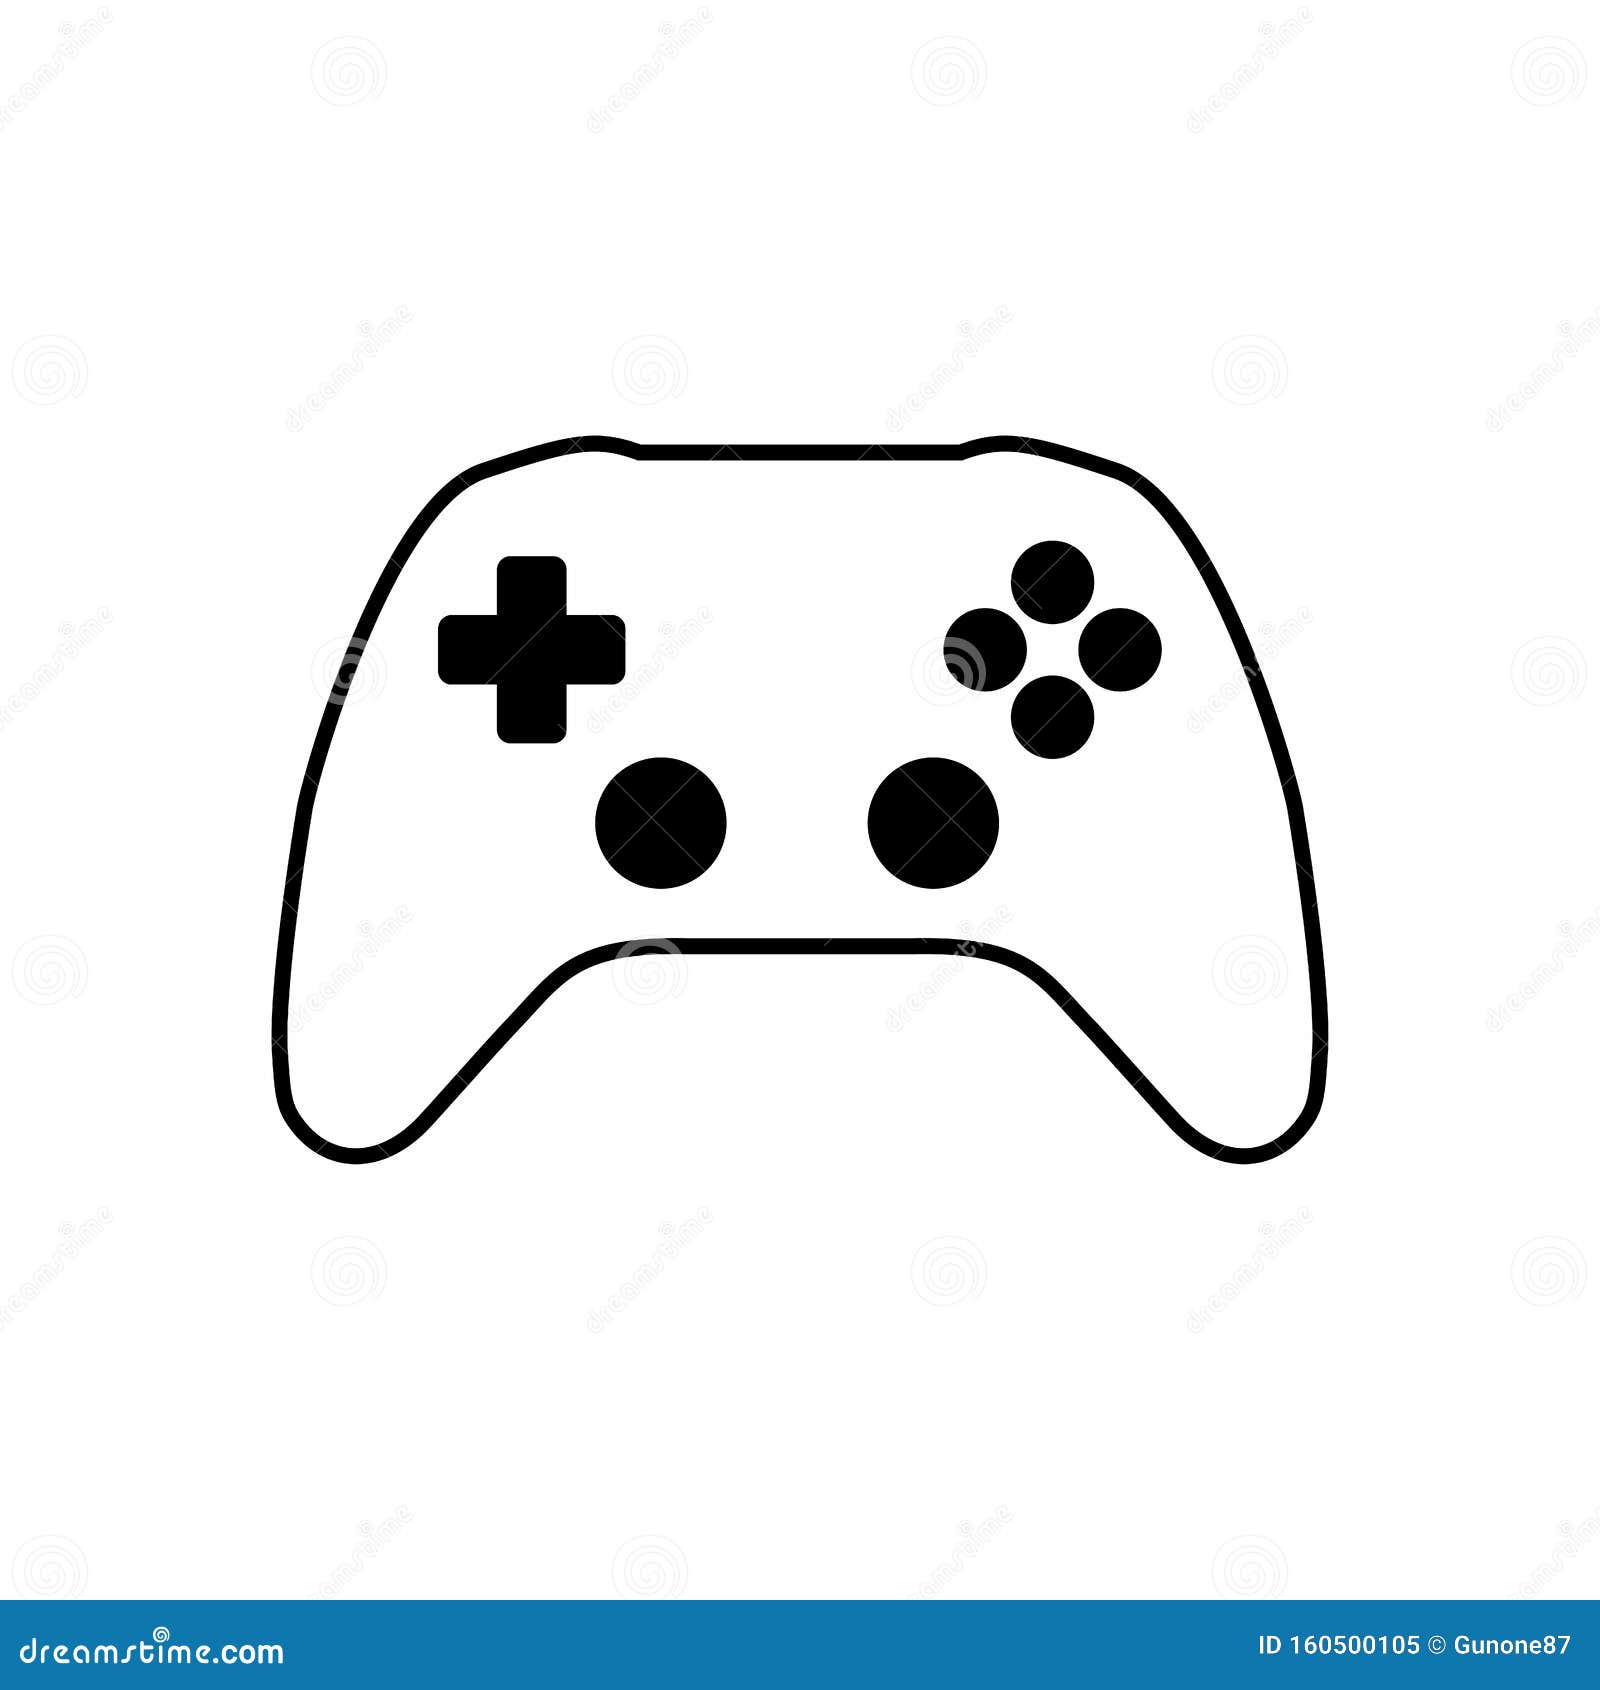 Outline Joystick Game Pad Controller Vector For Gameplay